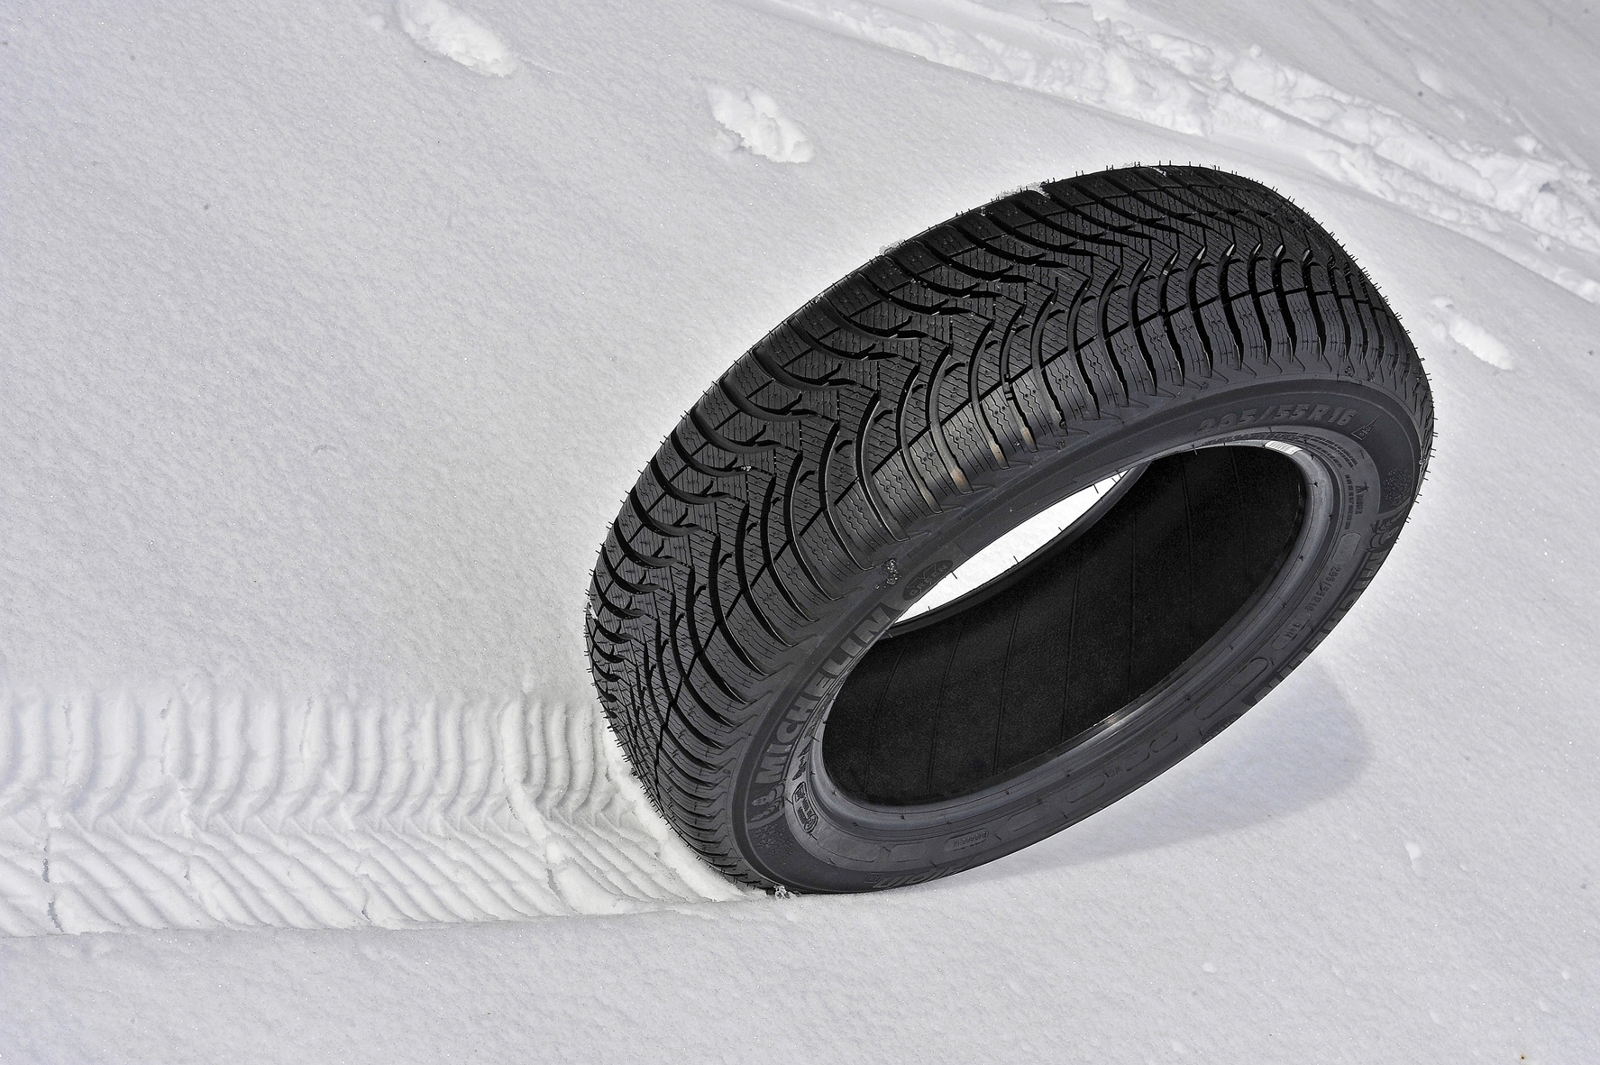 Winter tyres are designed to give grip in low temperatures